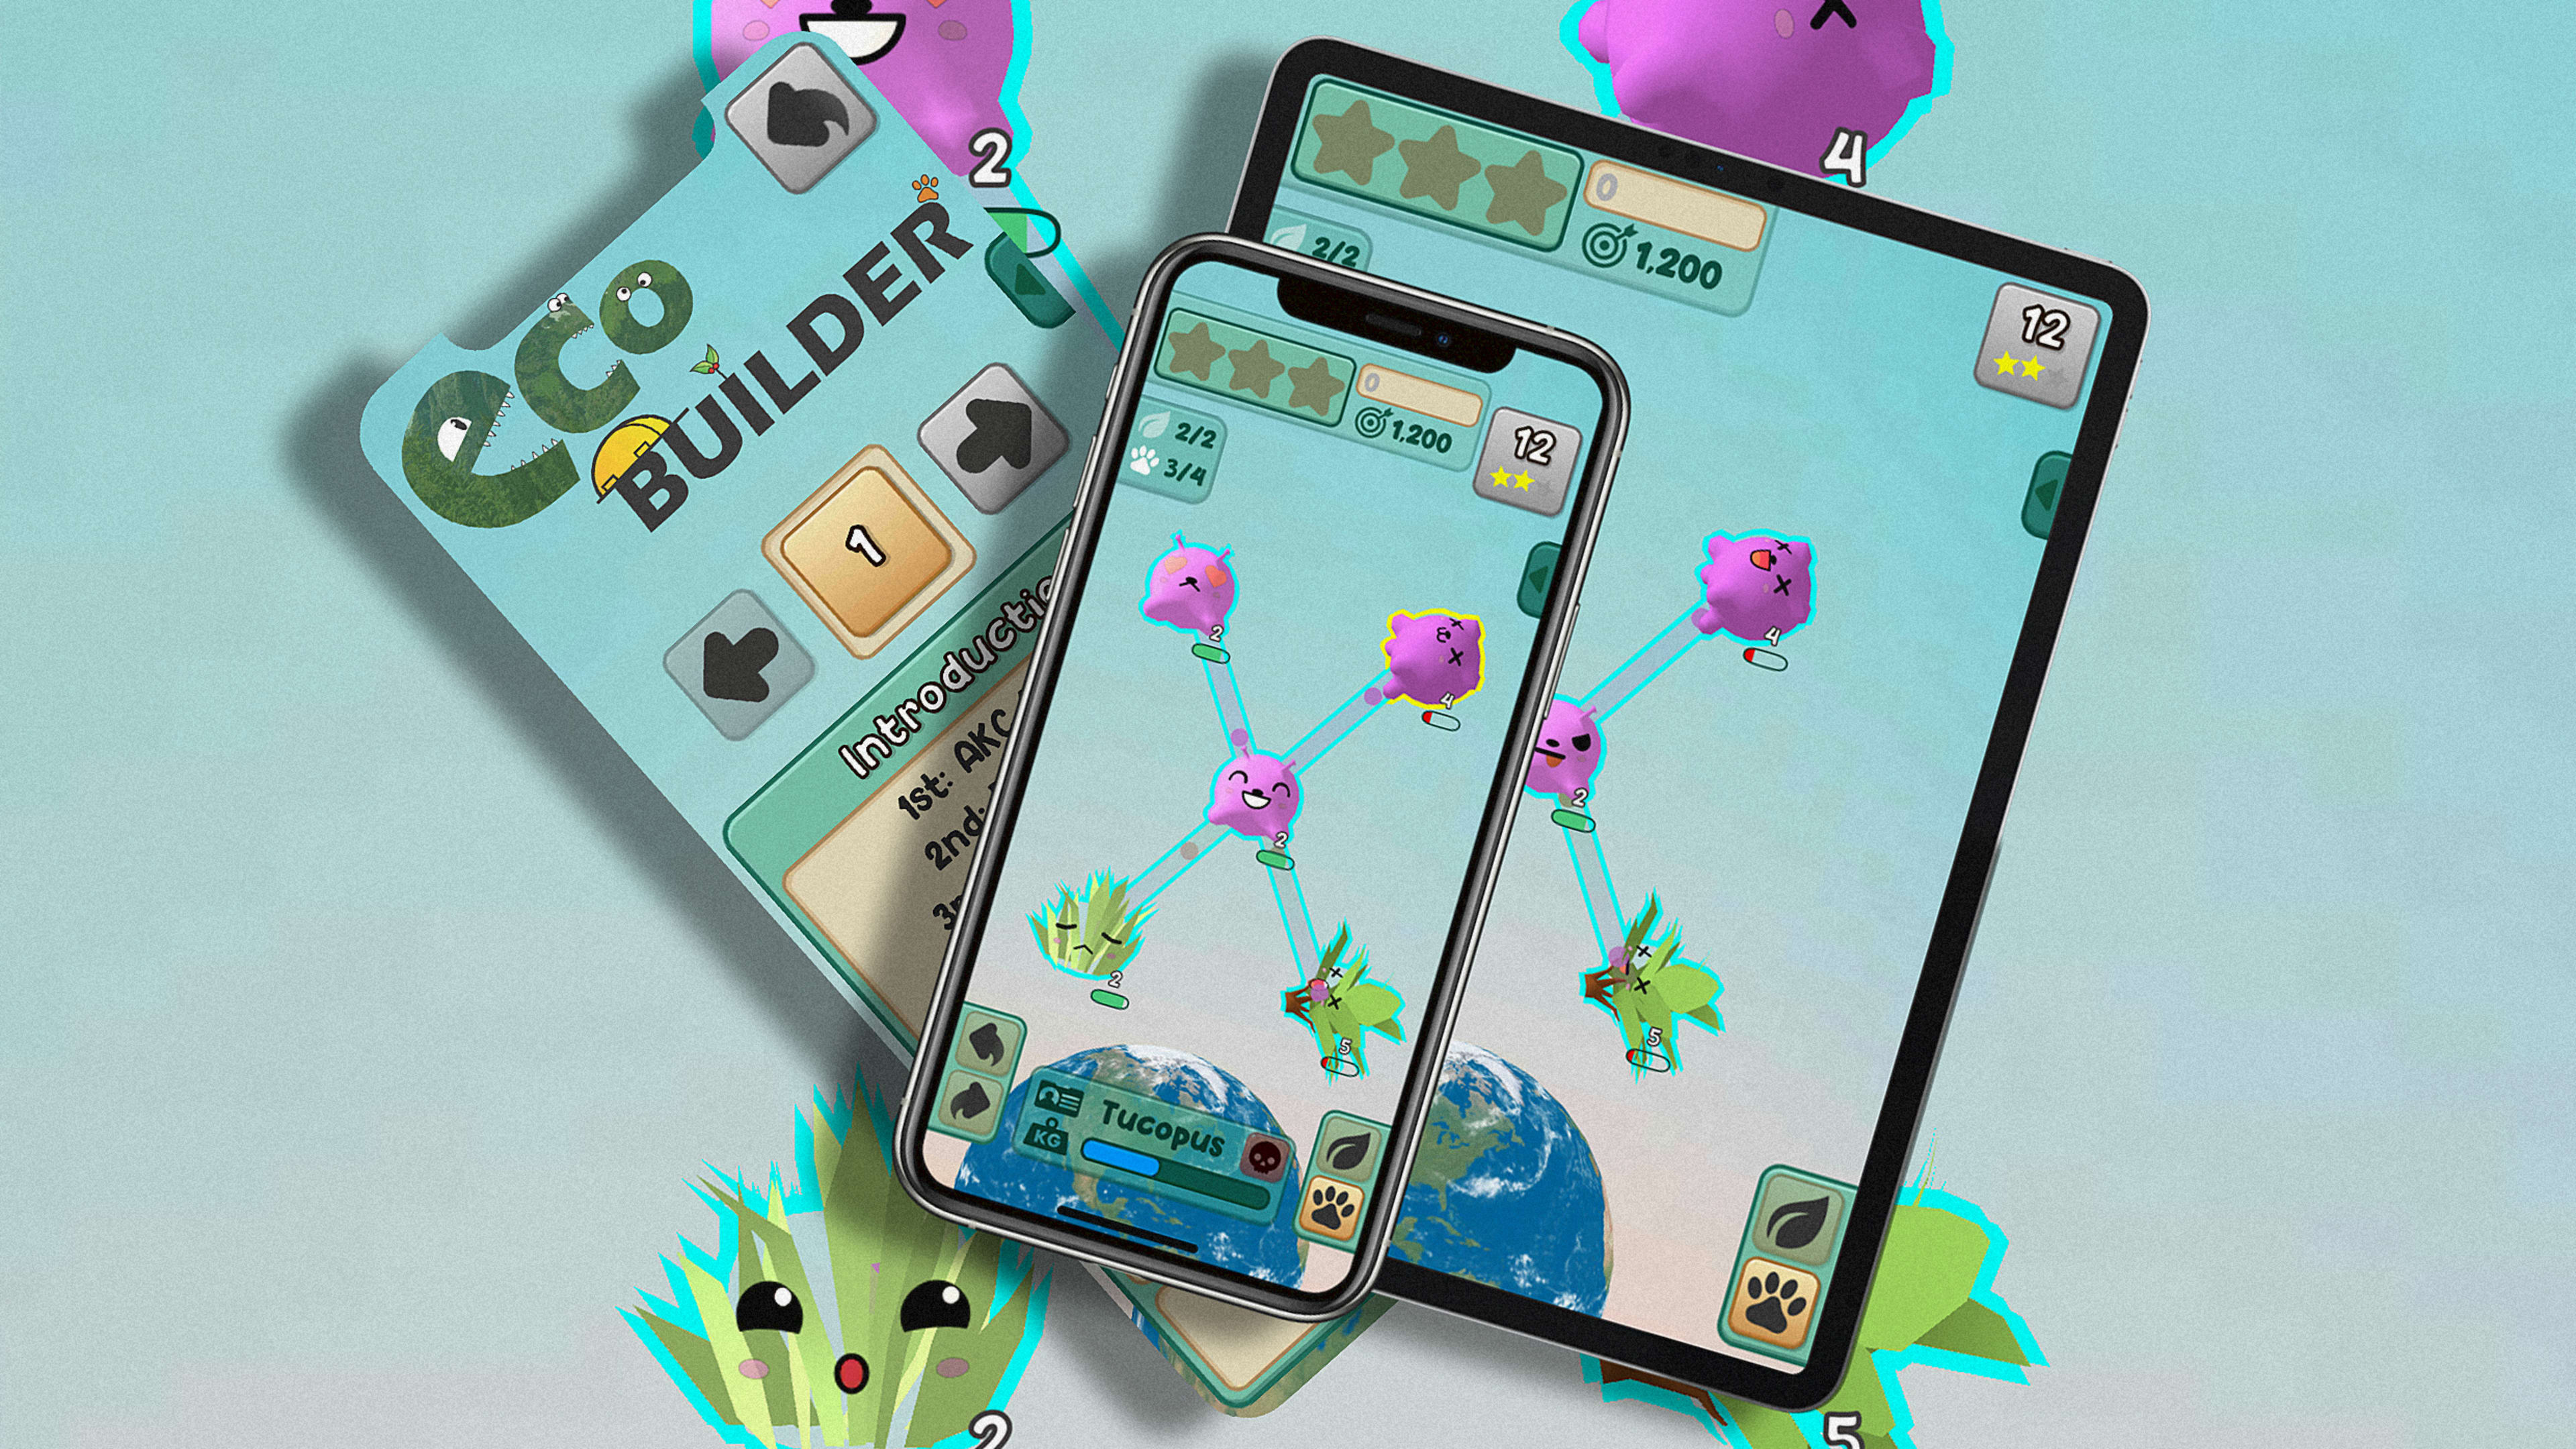 This mobile game lets you build ecosystems that will help solve real-world ecological problems